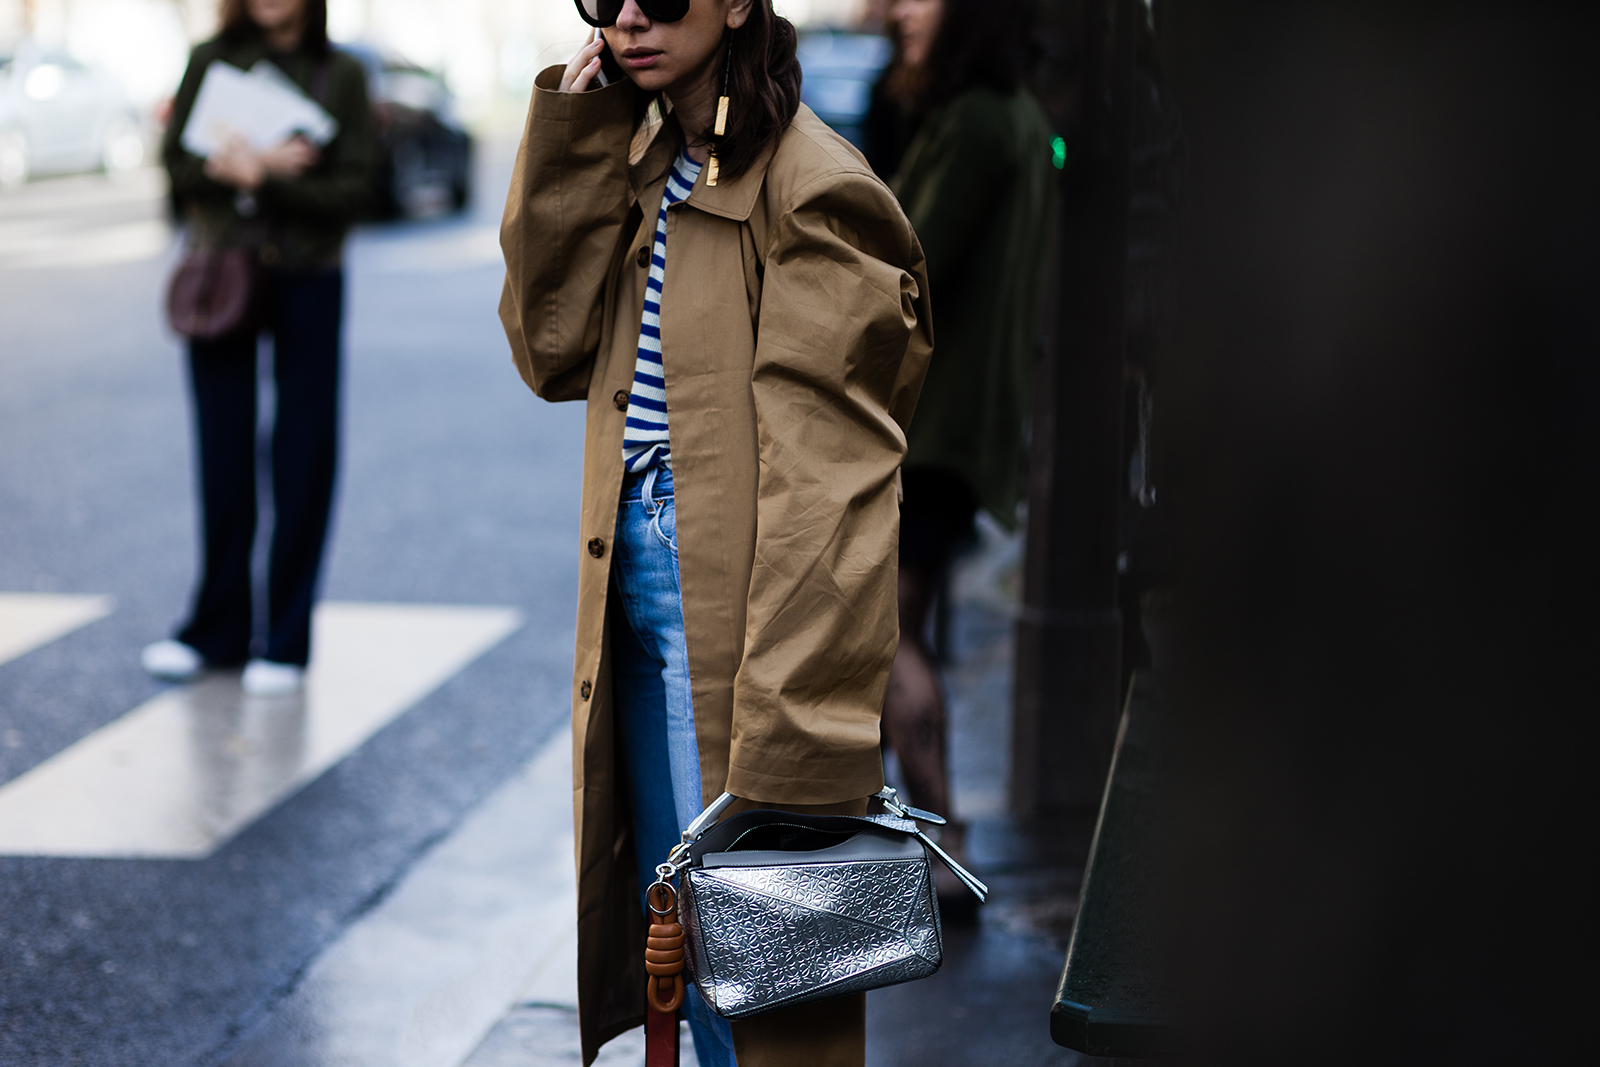 Natasha Goldenberg wearing a trench coat, Vetements jeans and Loewe bag before a fashion show in Paris, France